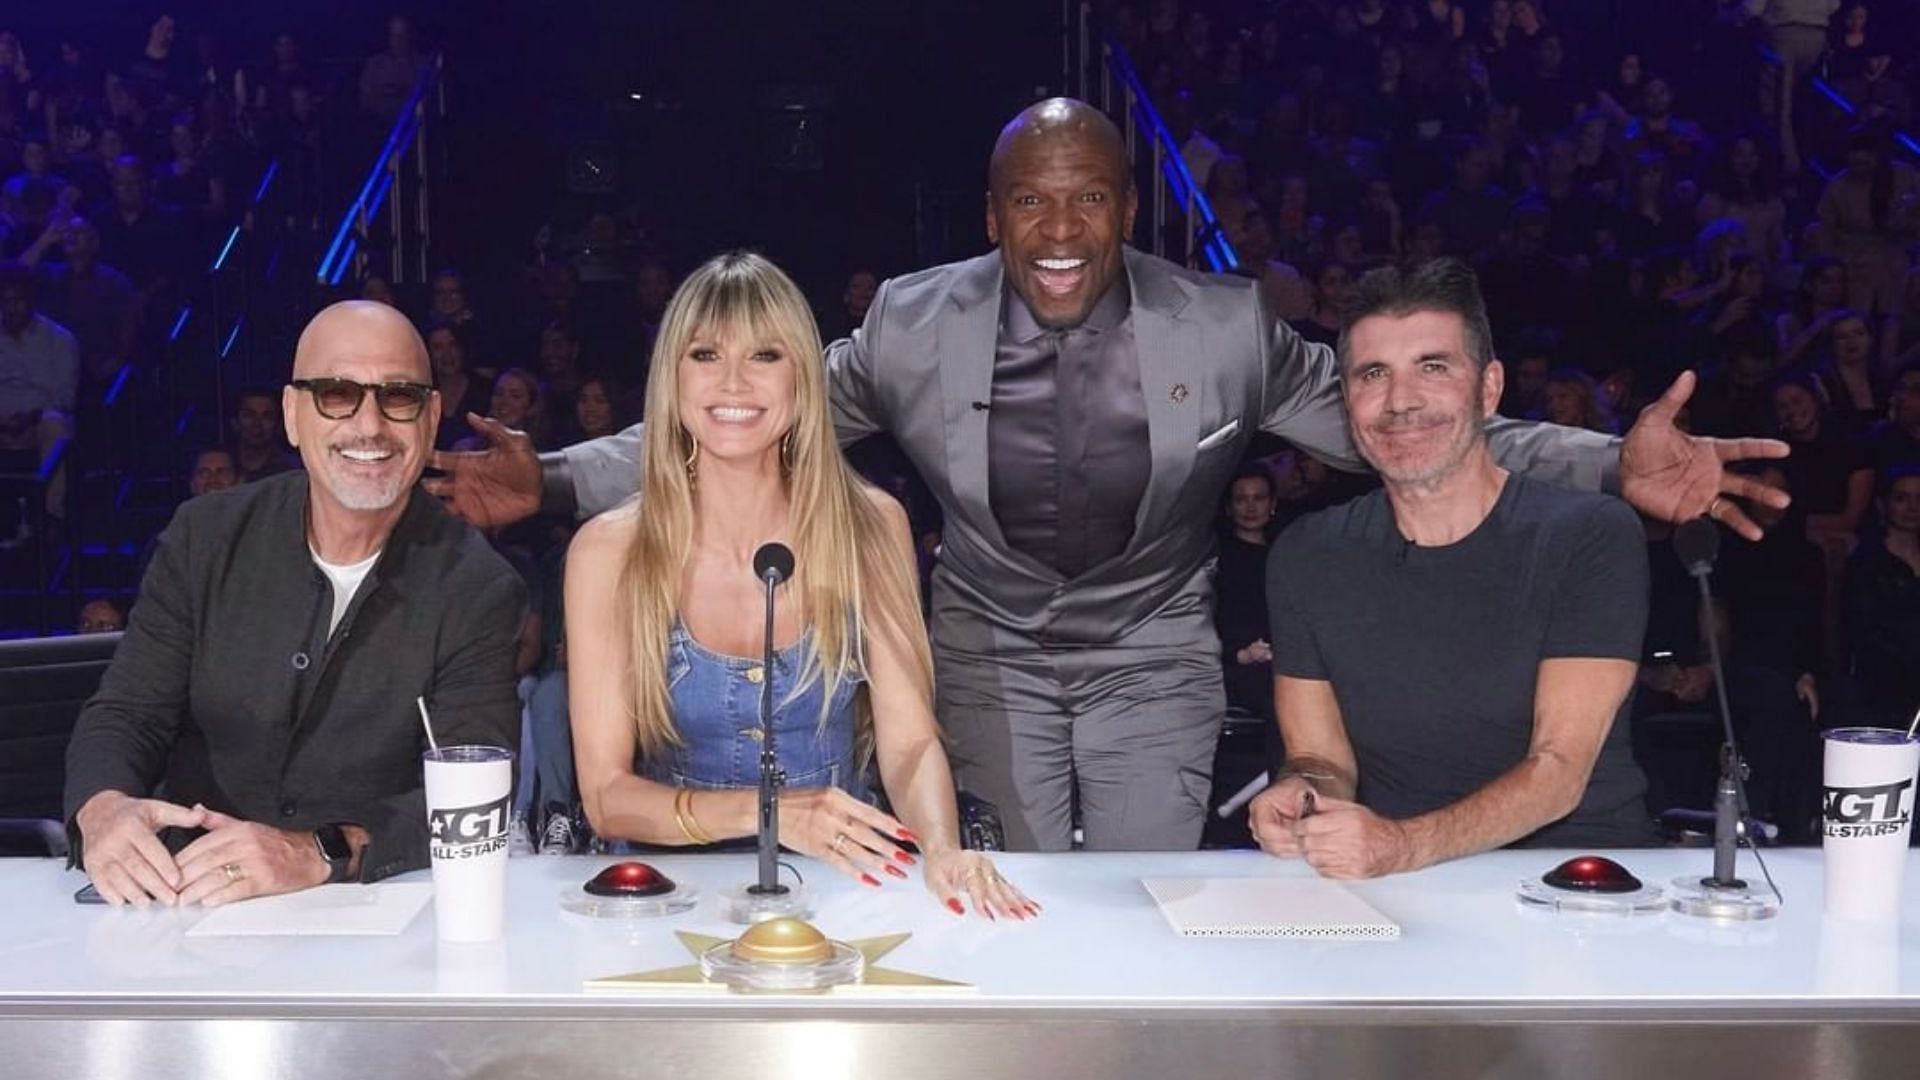 AGT: All Stars is all set to premiere in 2023